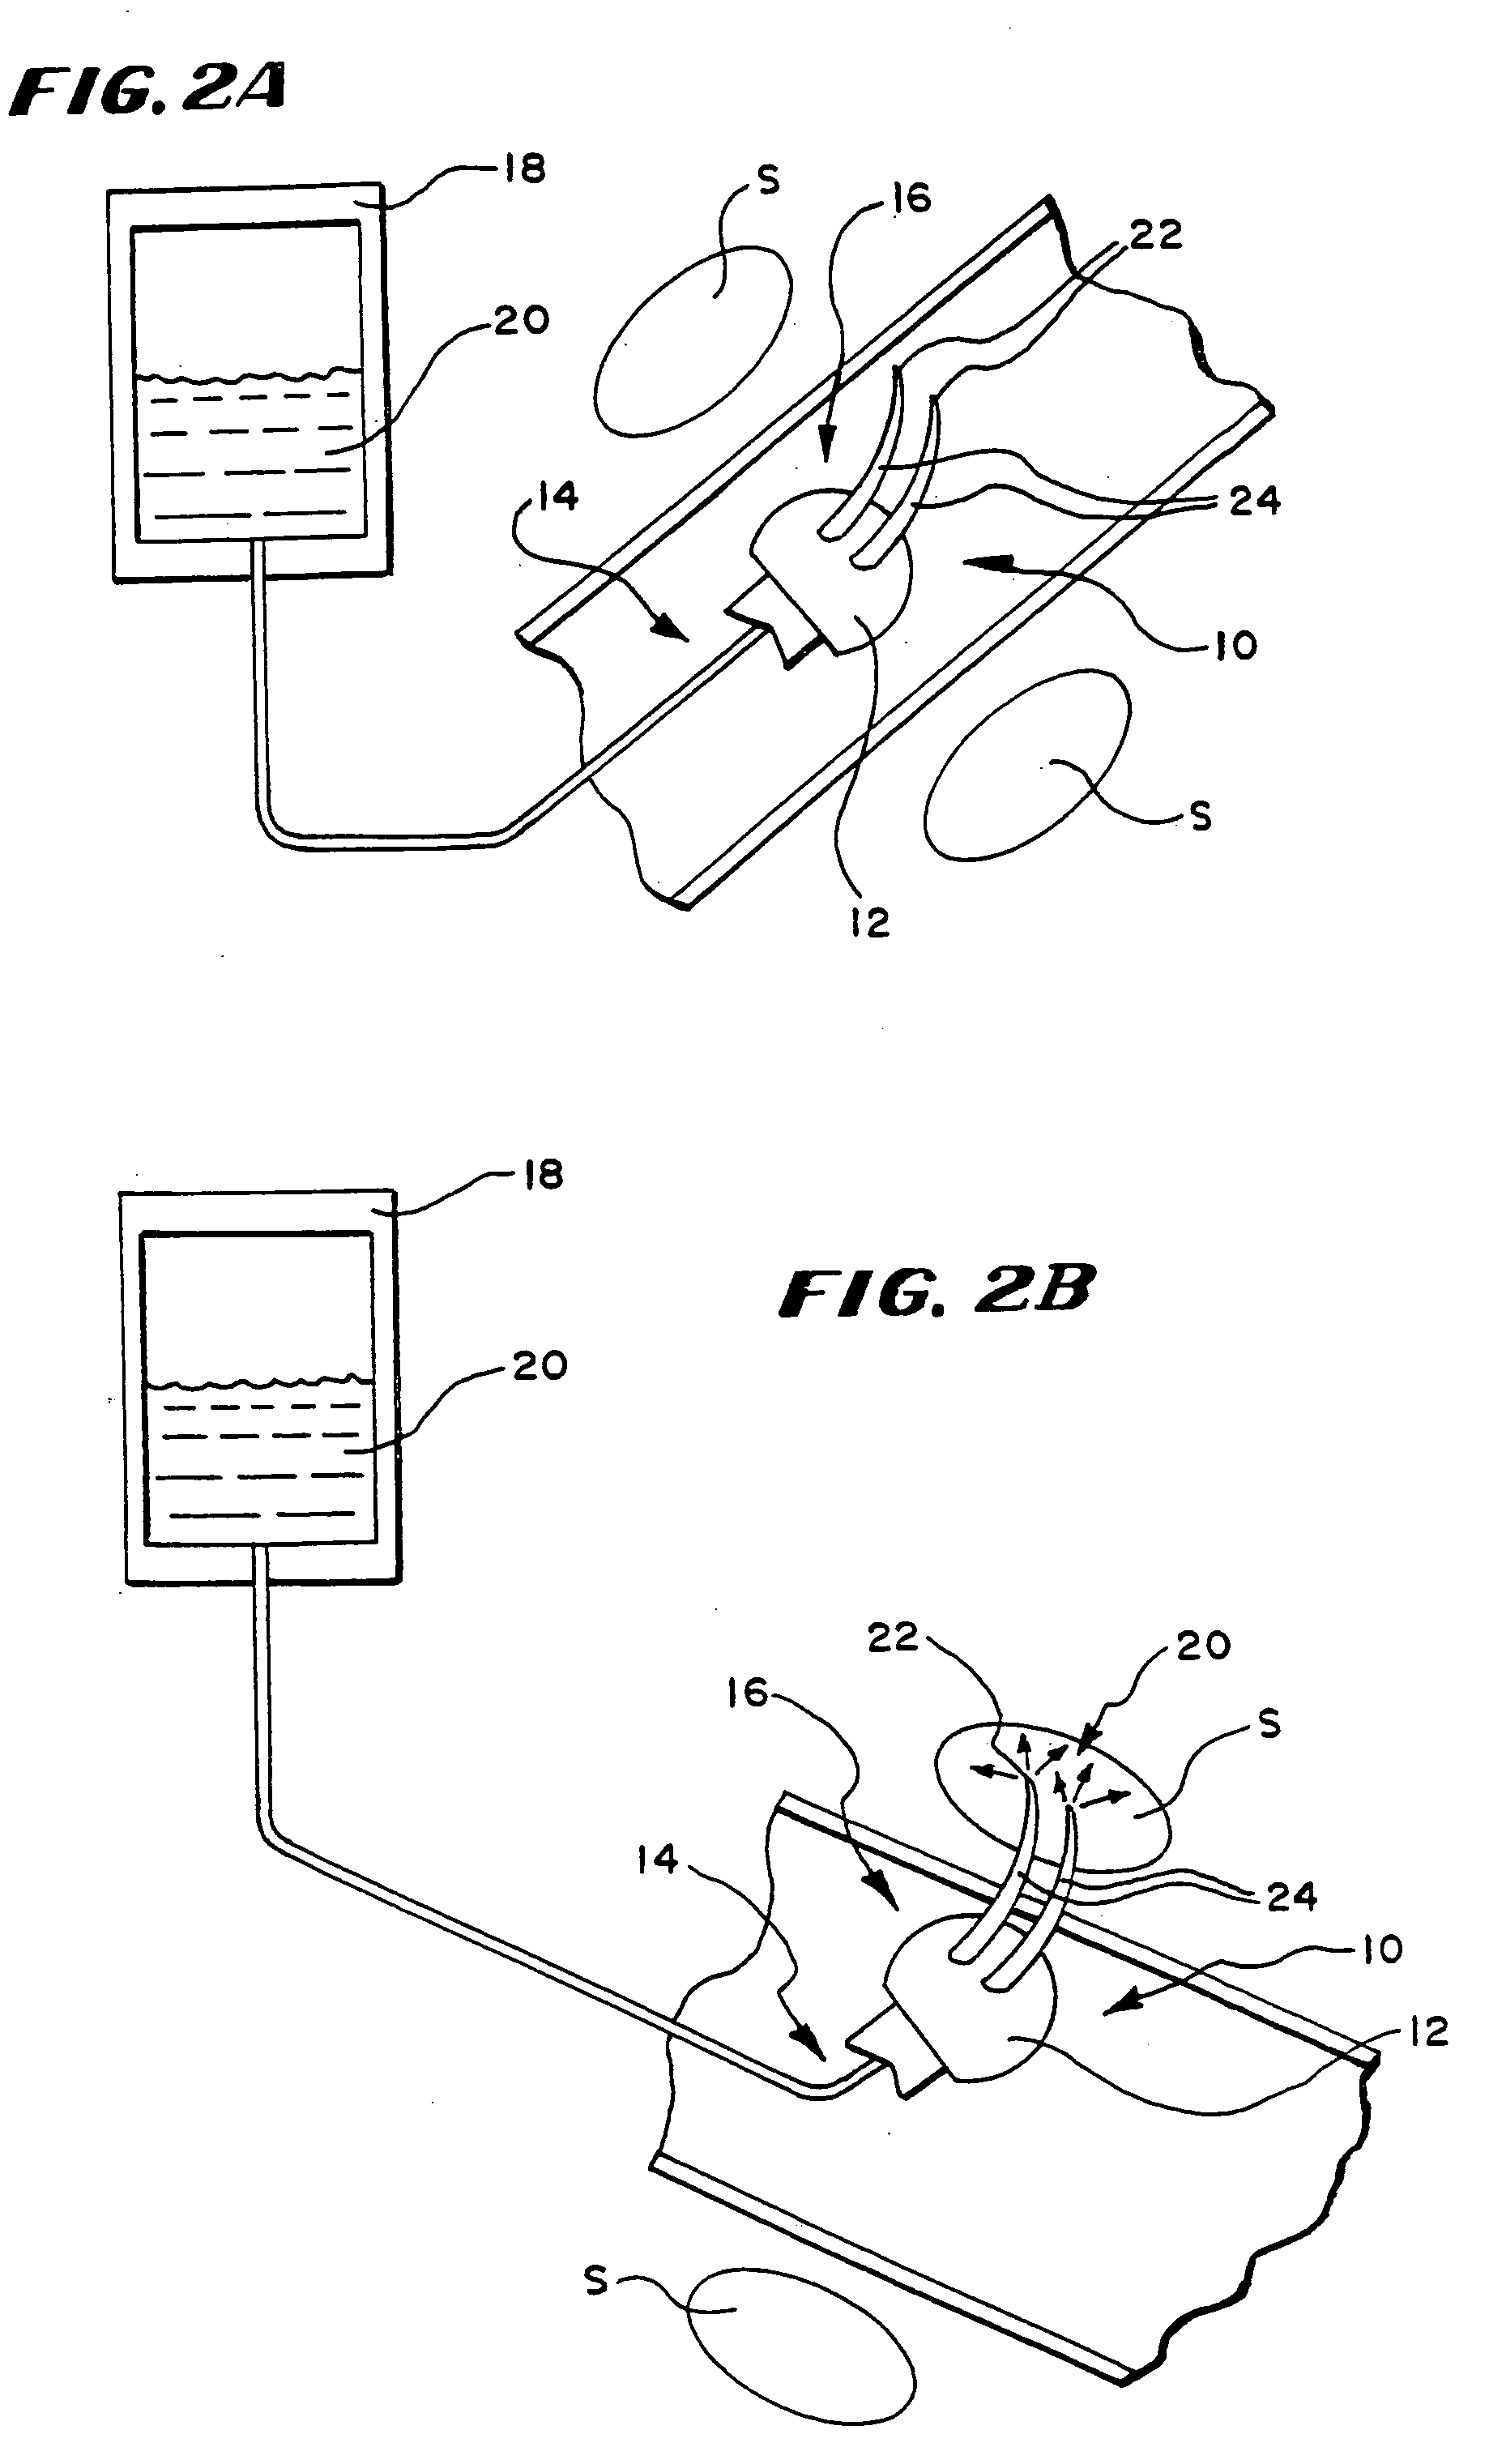 Systems methods for applying a selected treatment agent into contact with tissue to treat sphincter dysfunction